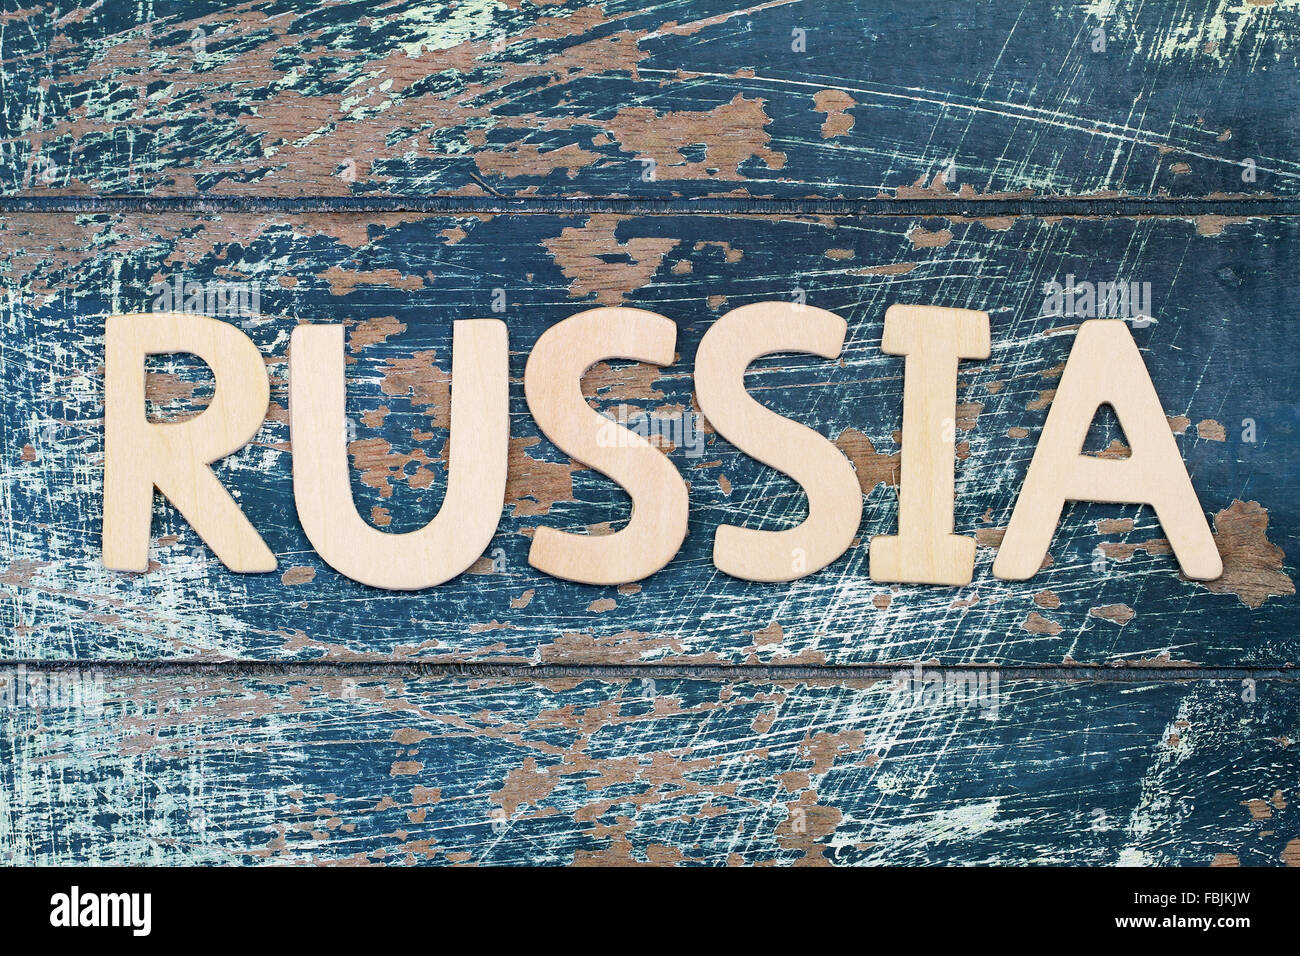 Russia written with wooden letters on rustic surface Stock Photo